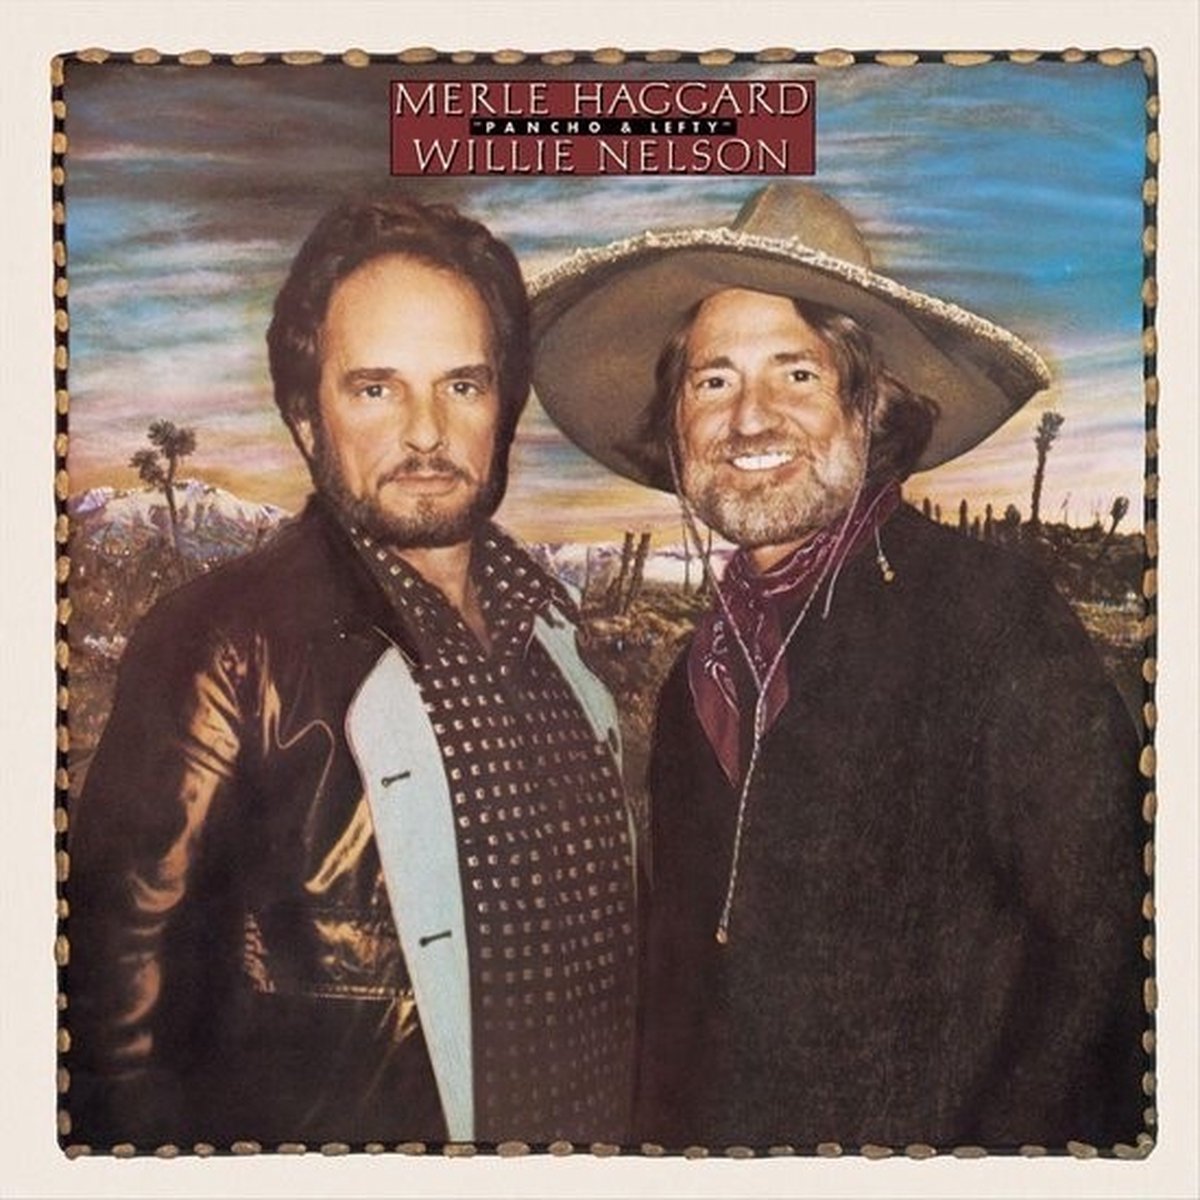 Merle Haggard & Willie Nelson - Pancho And Lefty (CD) - Merle Haggard & Willie Nelson